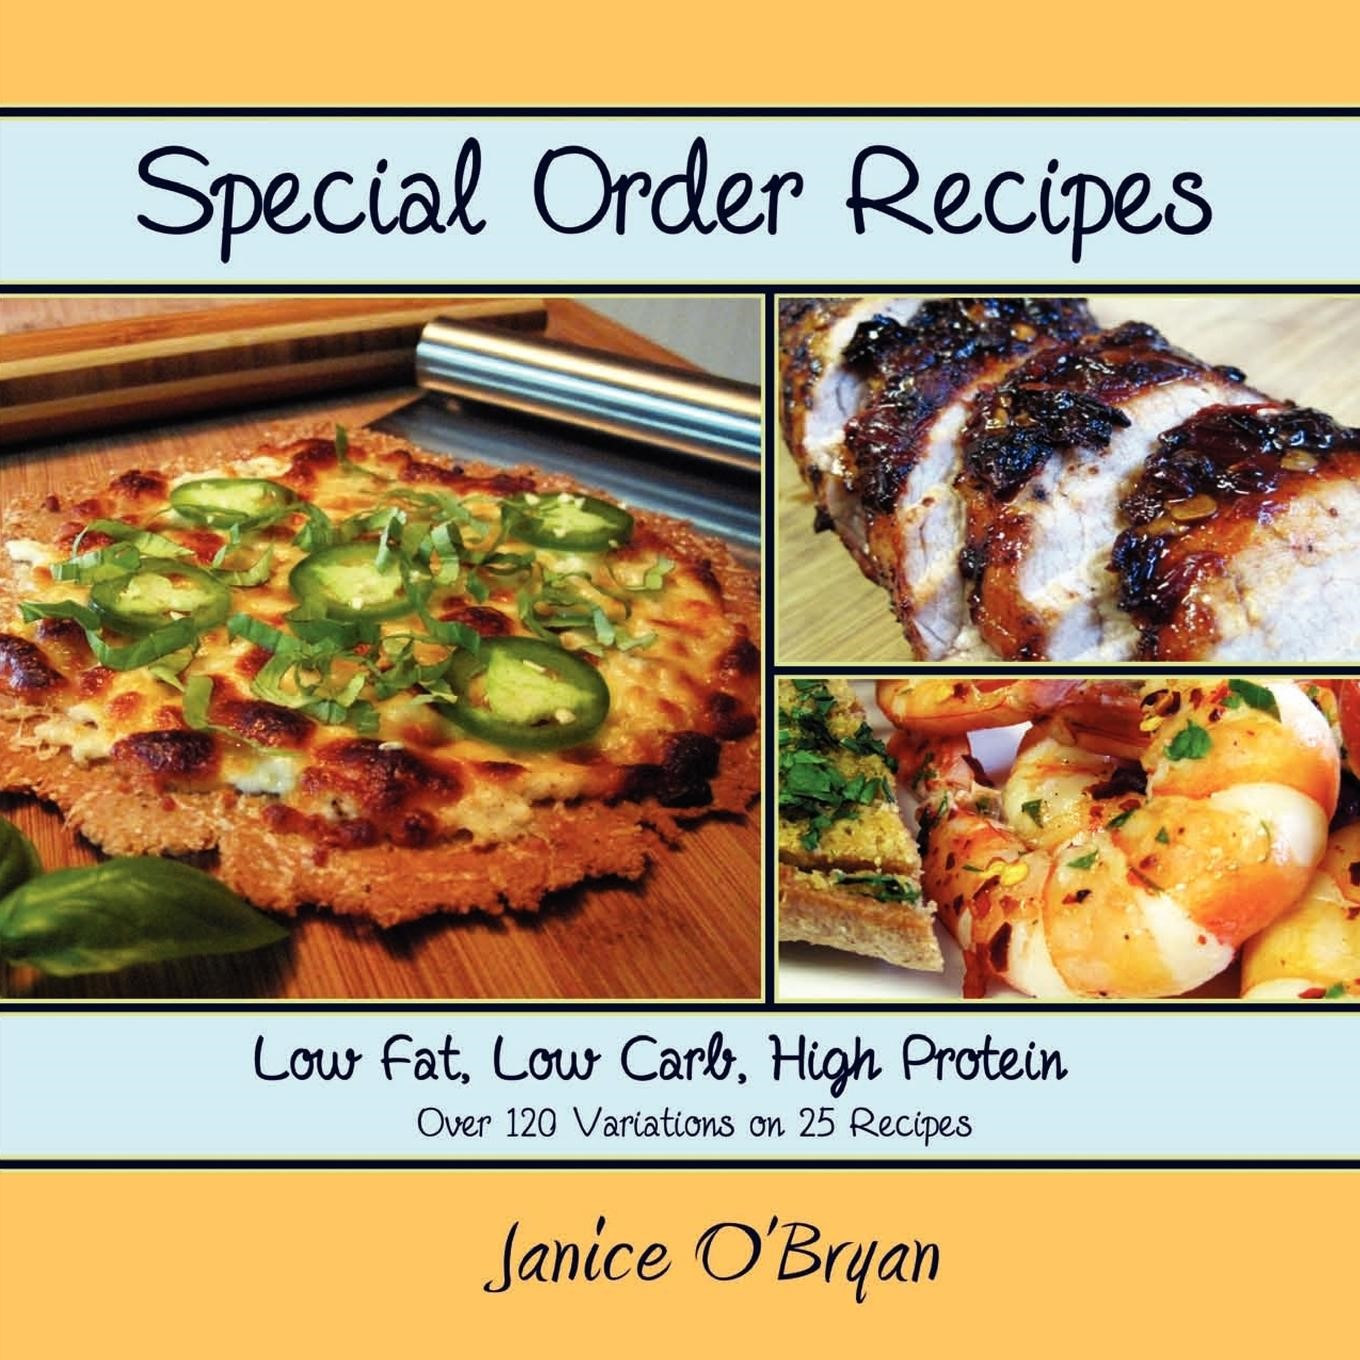 High Volume Low Calorie Recipes
 Special Order Recipes Low Fat Low Carb High Protein